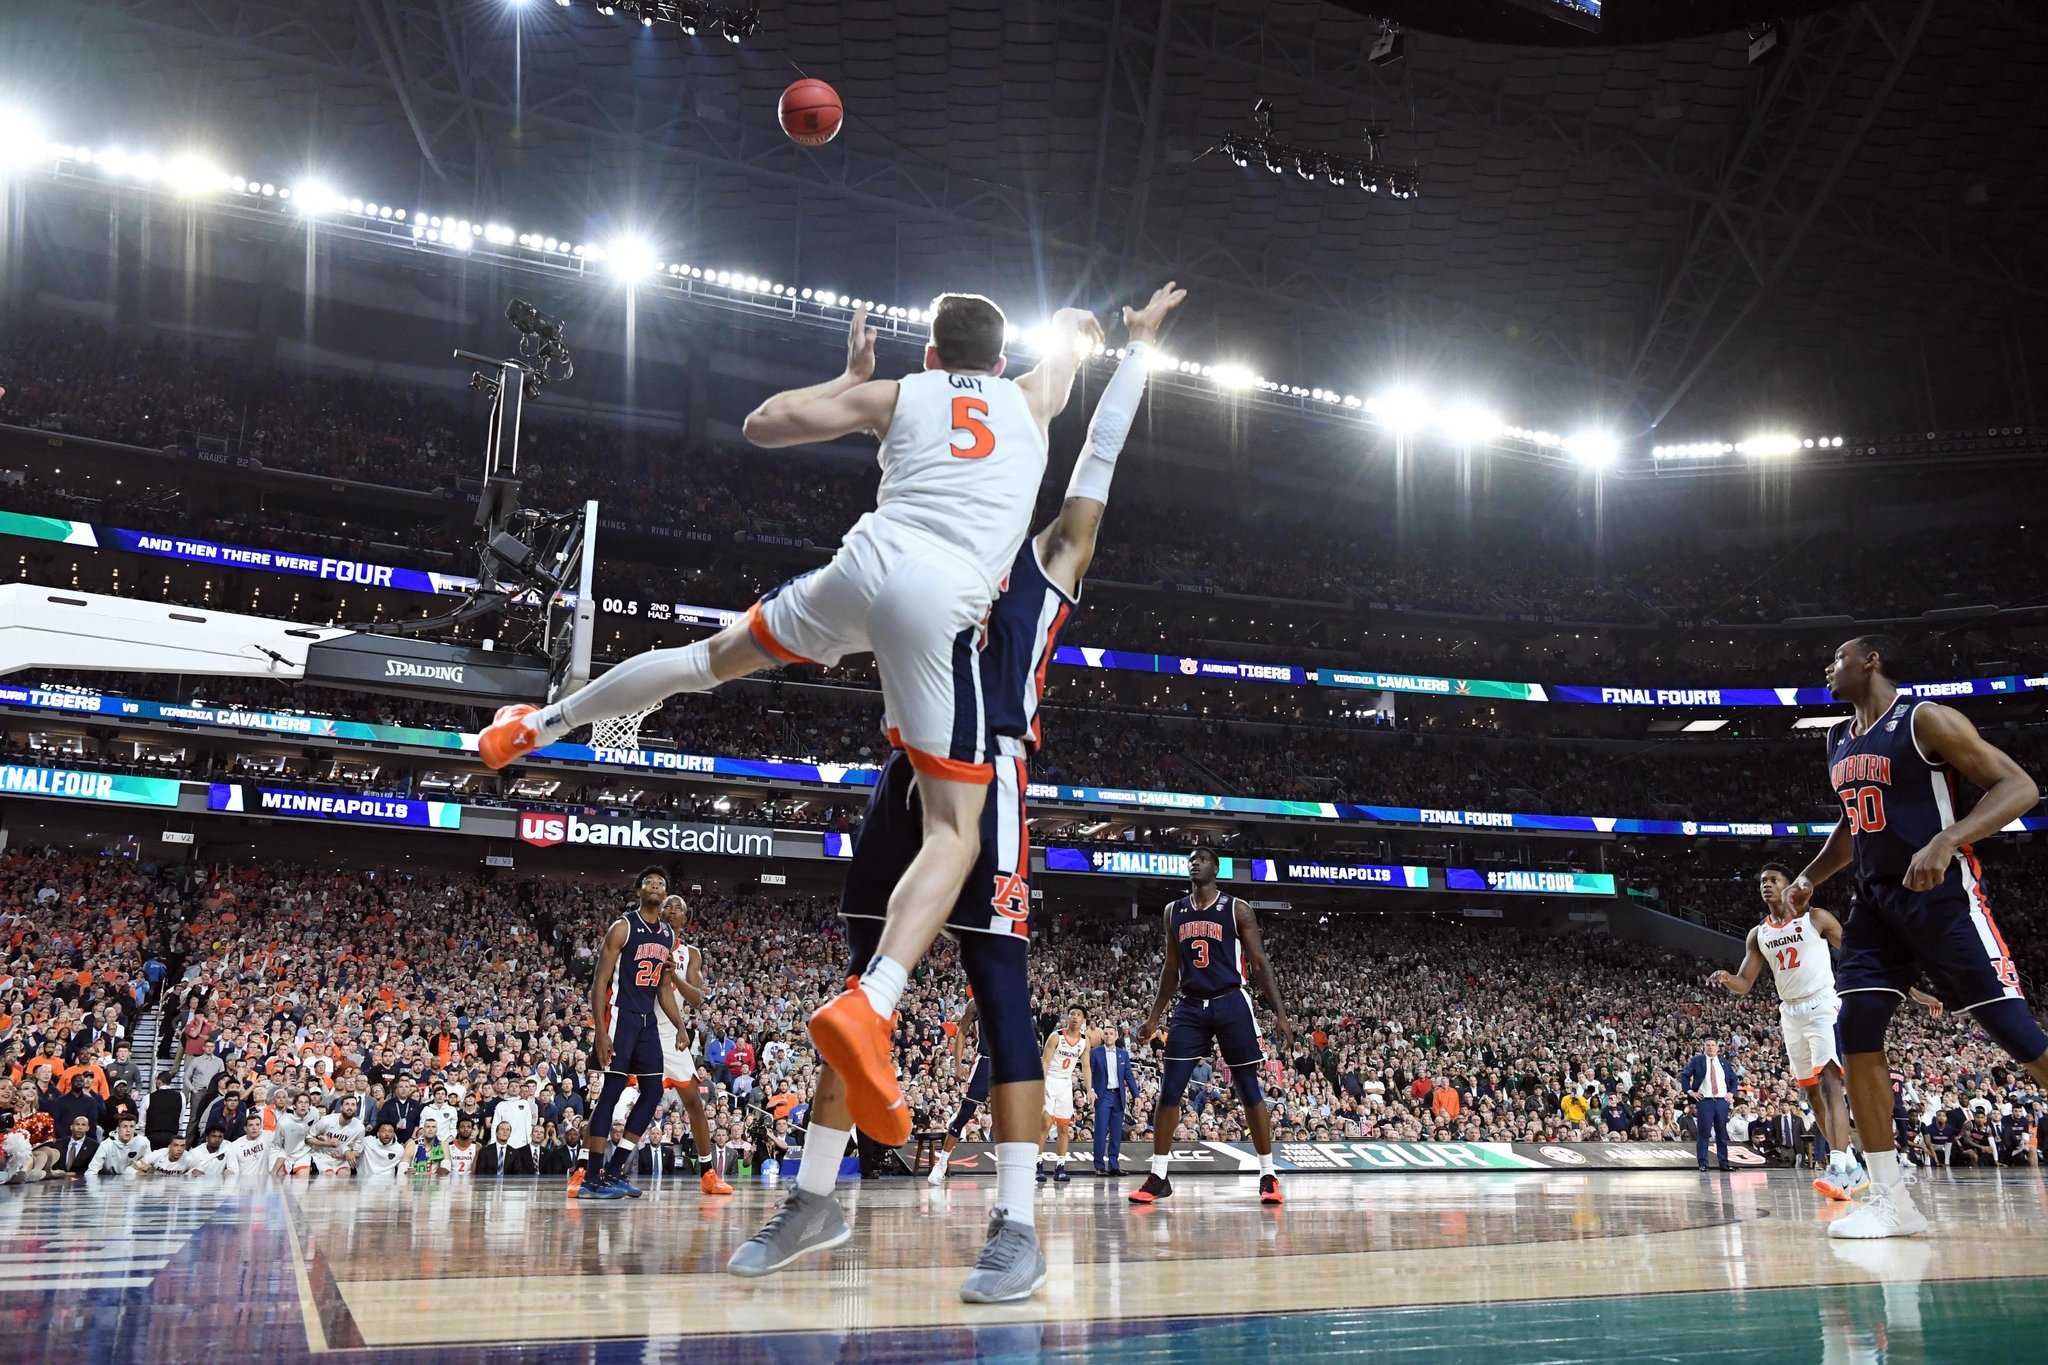  Did the NCAA Rig the Final Four for Virginia?